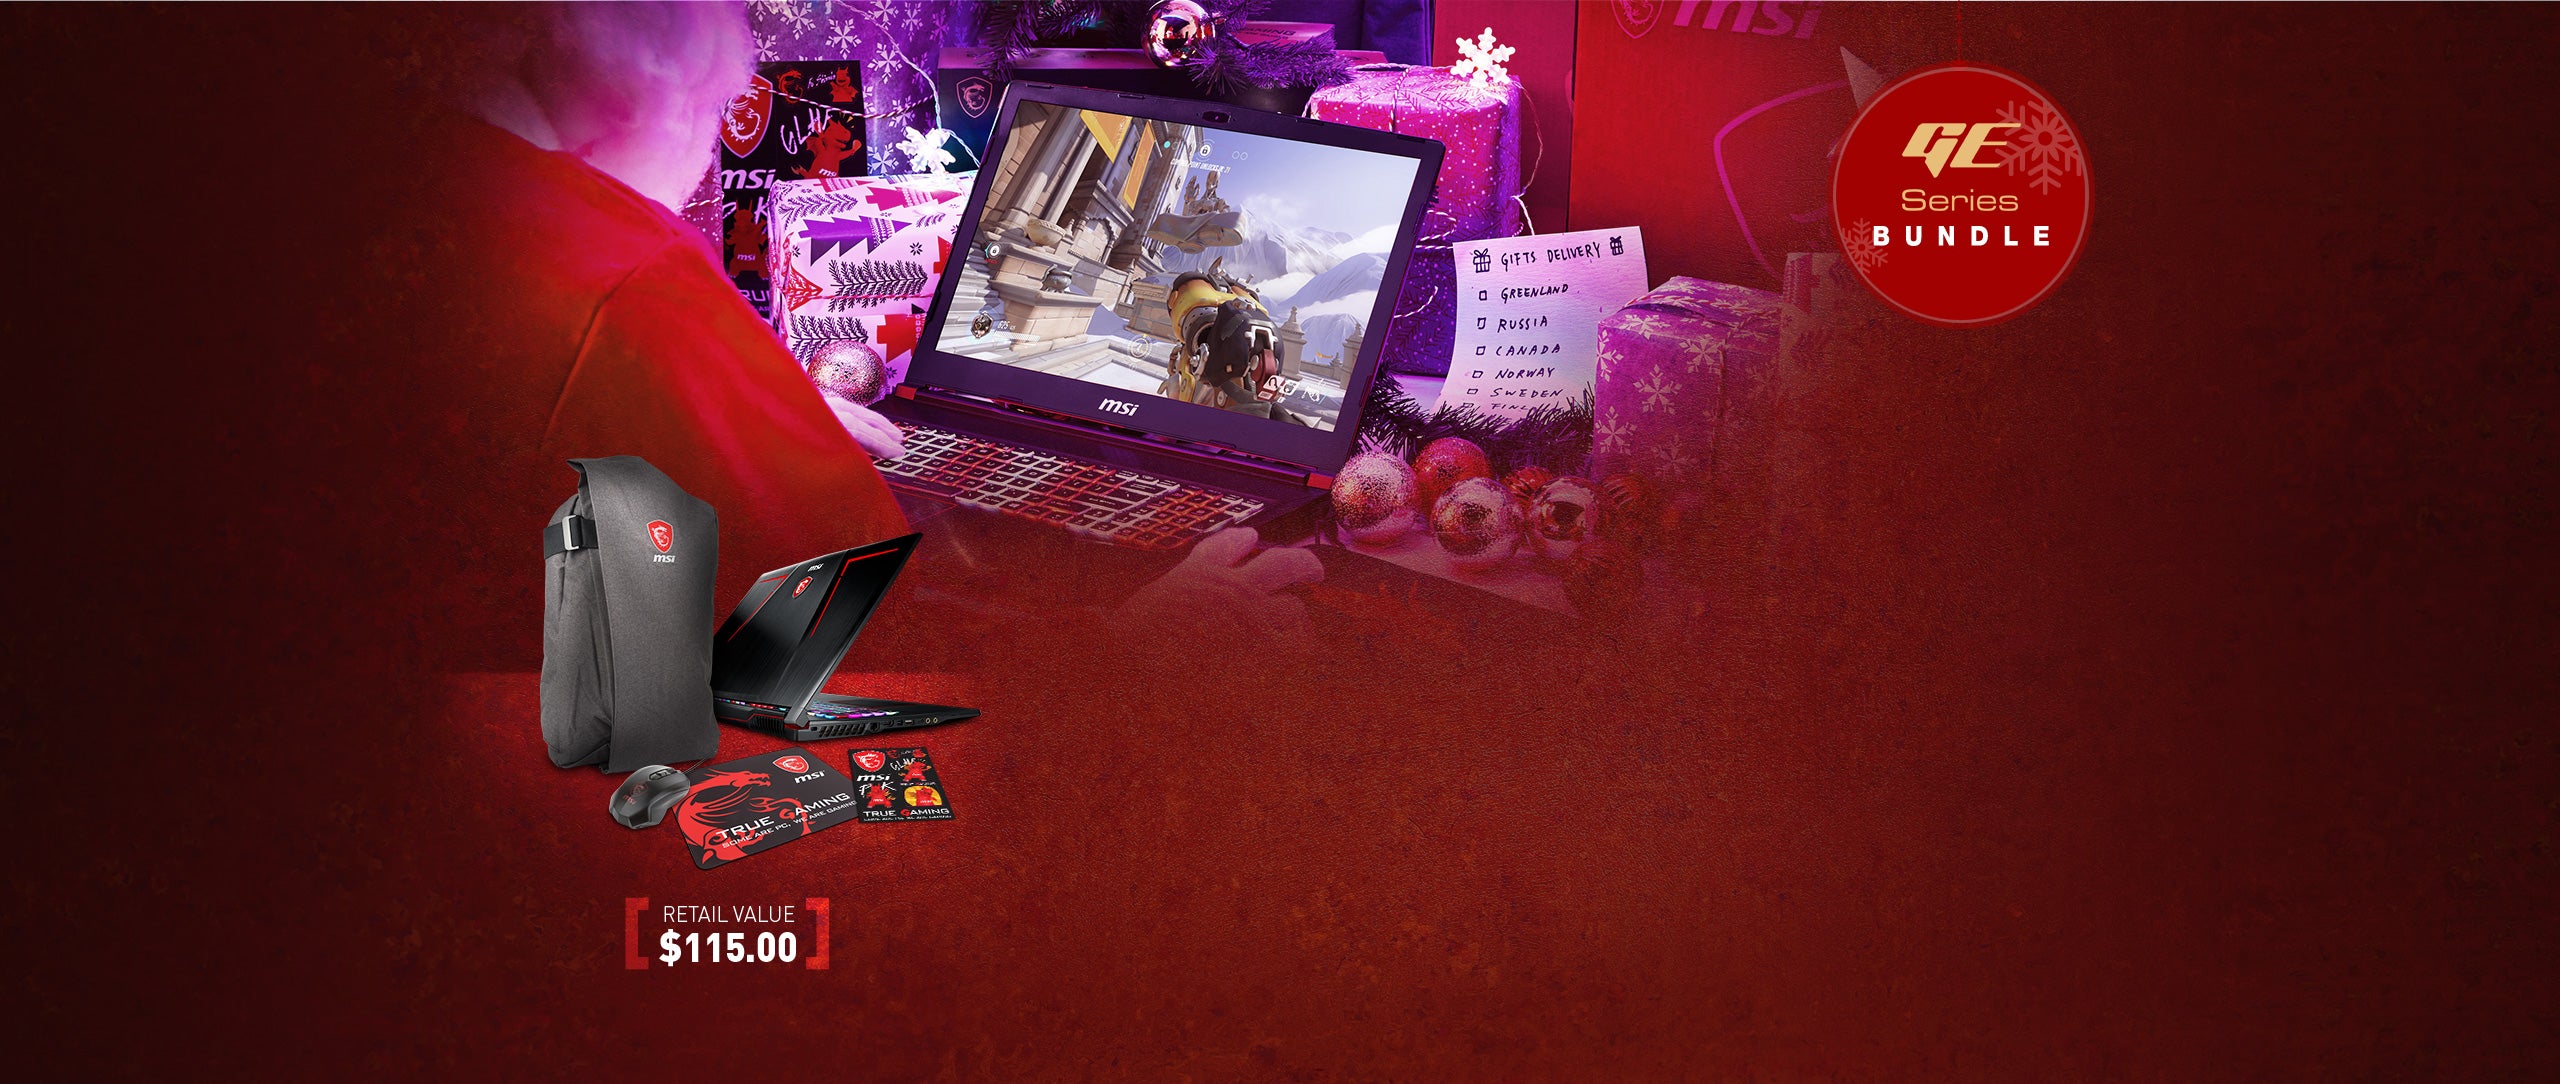 GE Series Bundle. Retail Value $115.00. Image Shows MSI backpack, mouse, mousepad and stickers. 